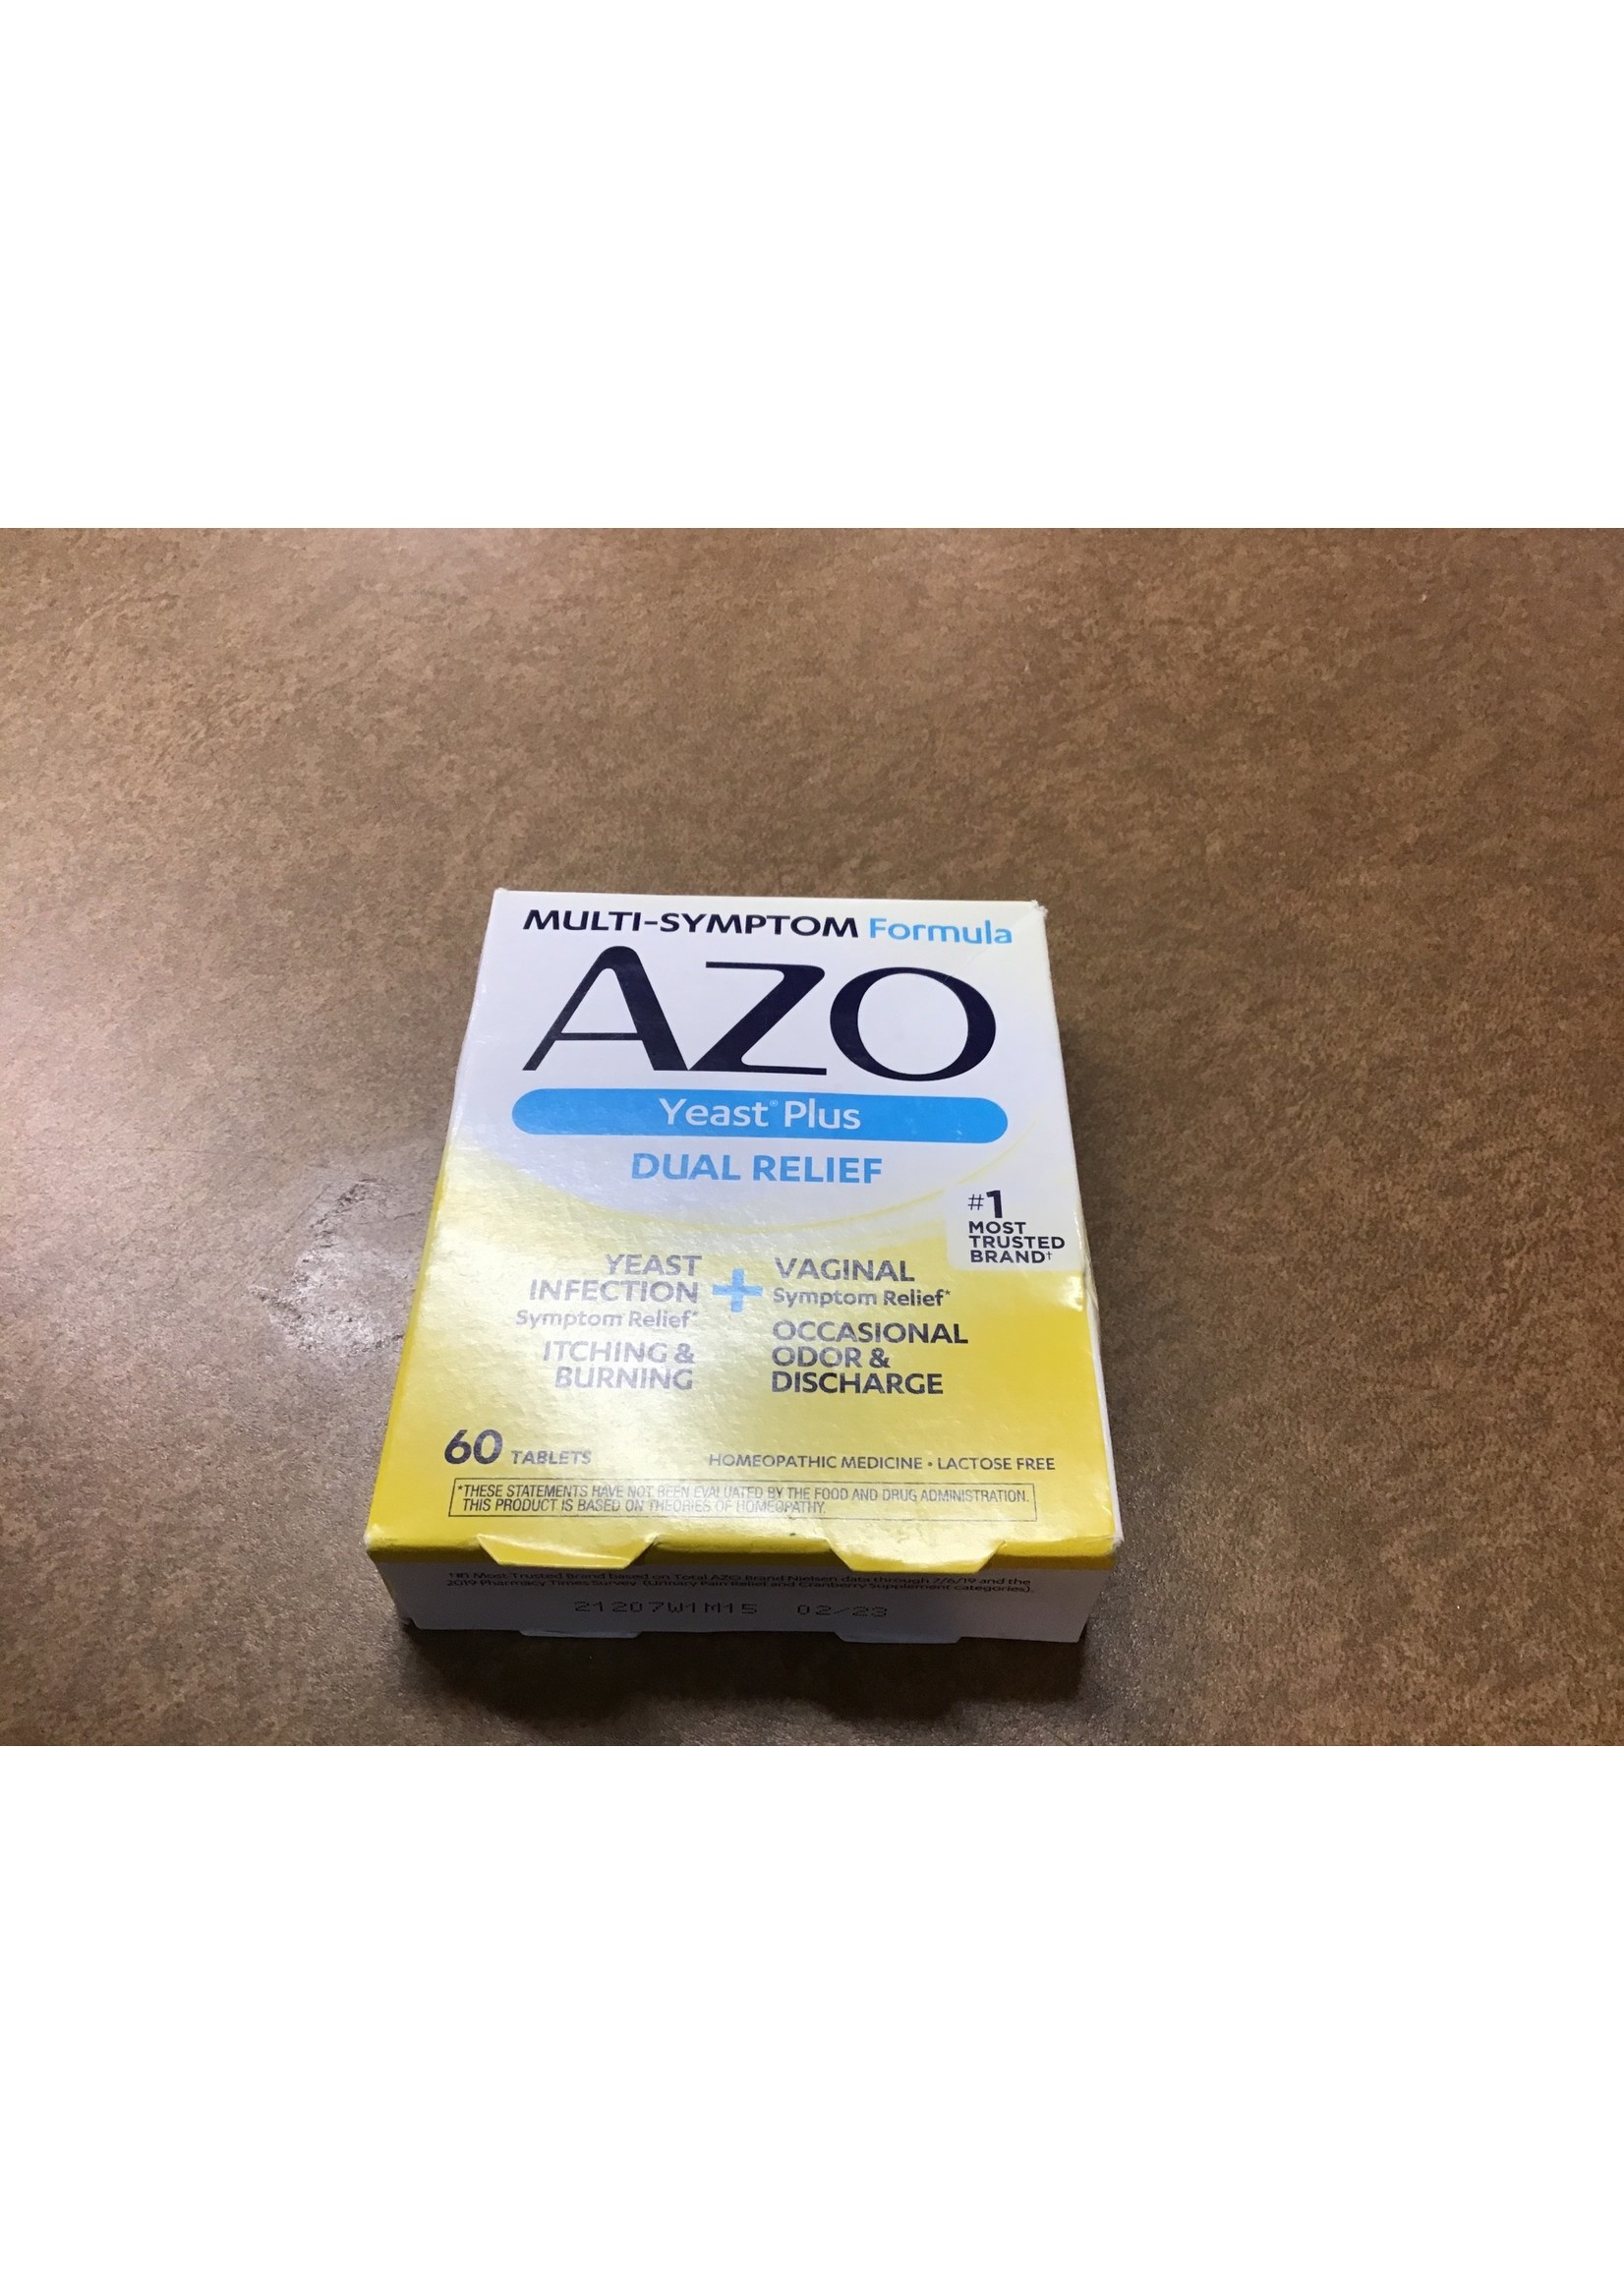 Azo Yeast Plus Dual Relief, Yeast Infection + Vaginal Symptom Relief, 60ct